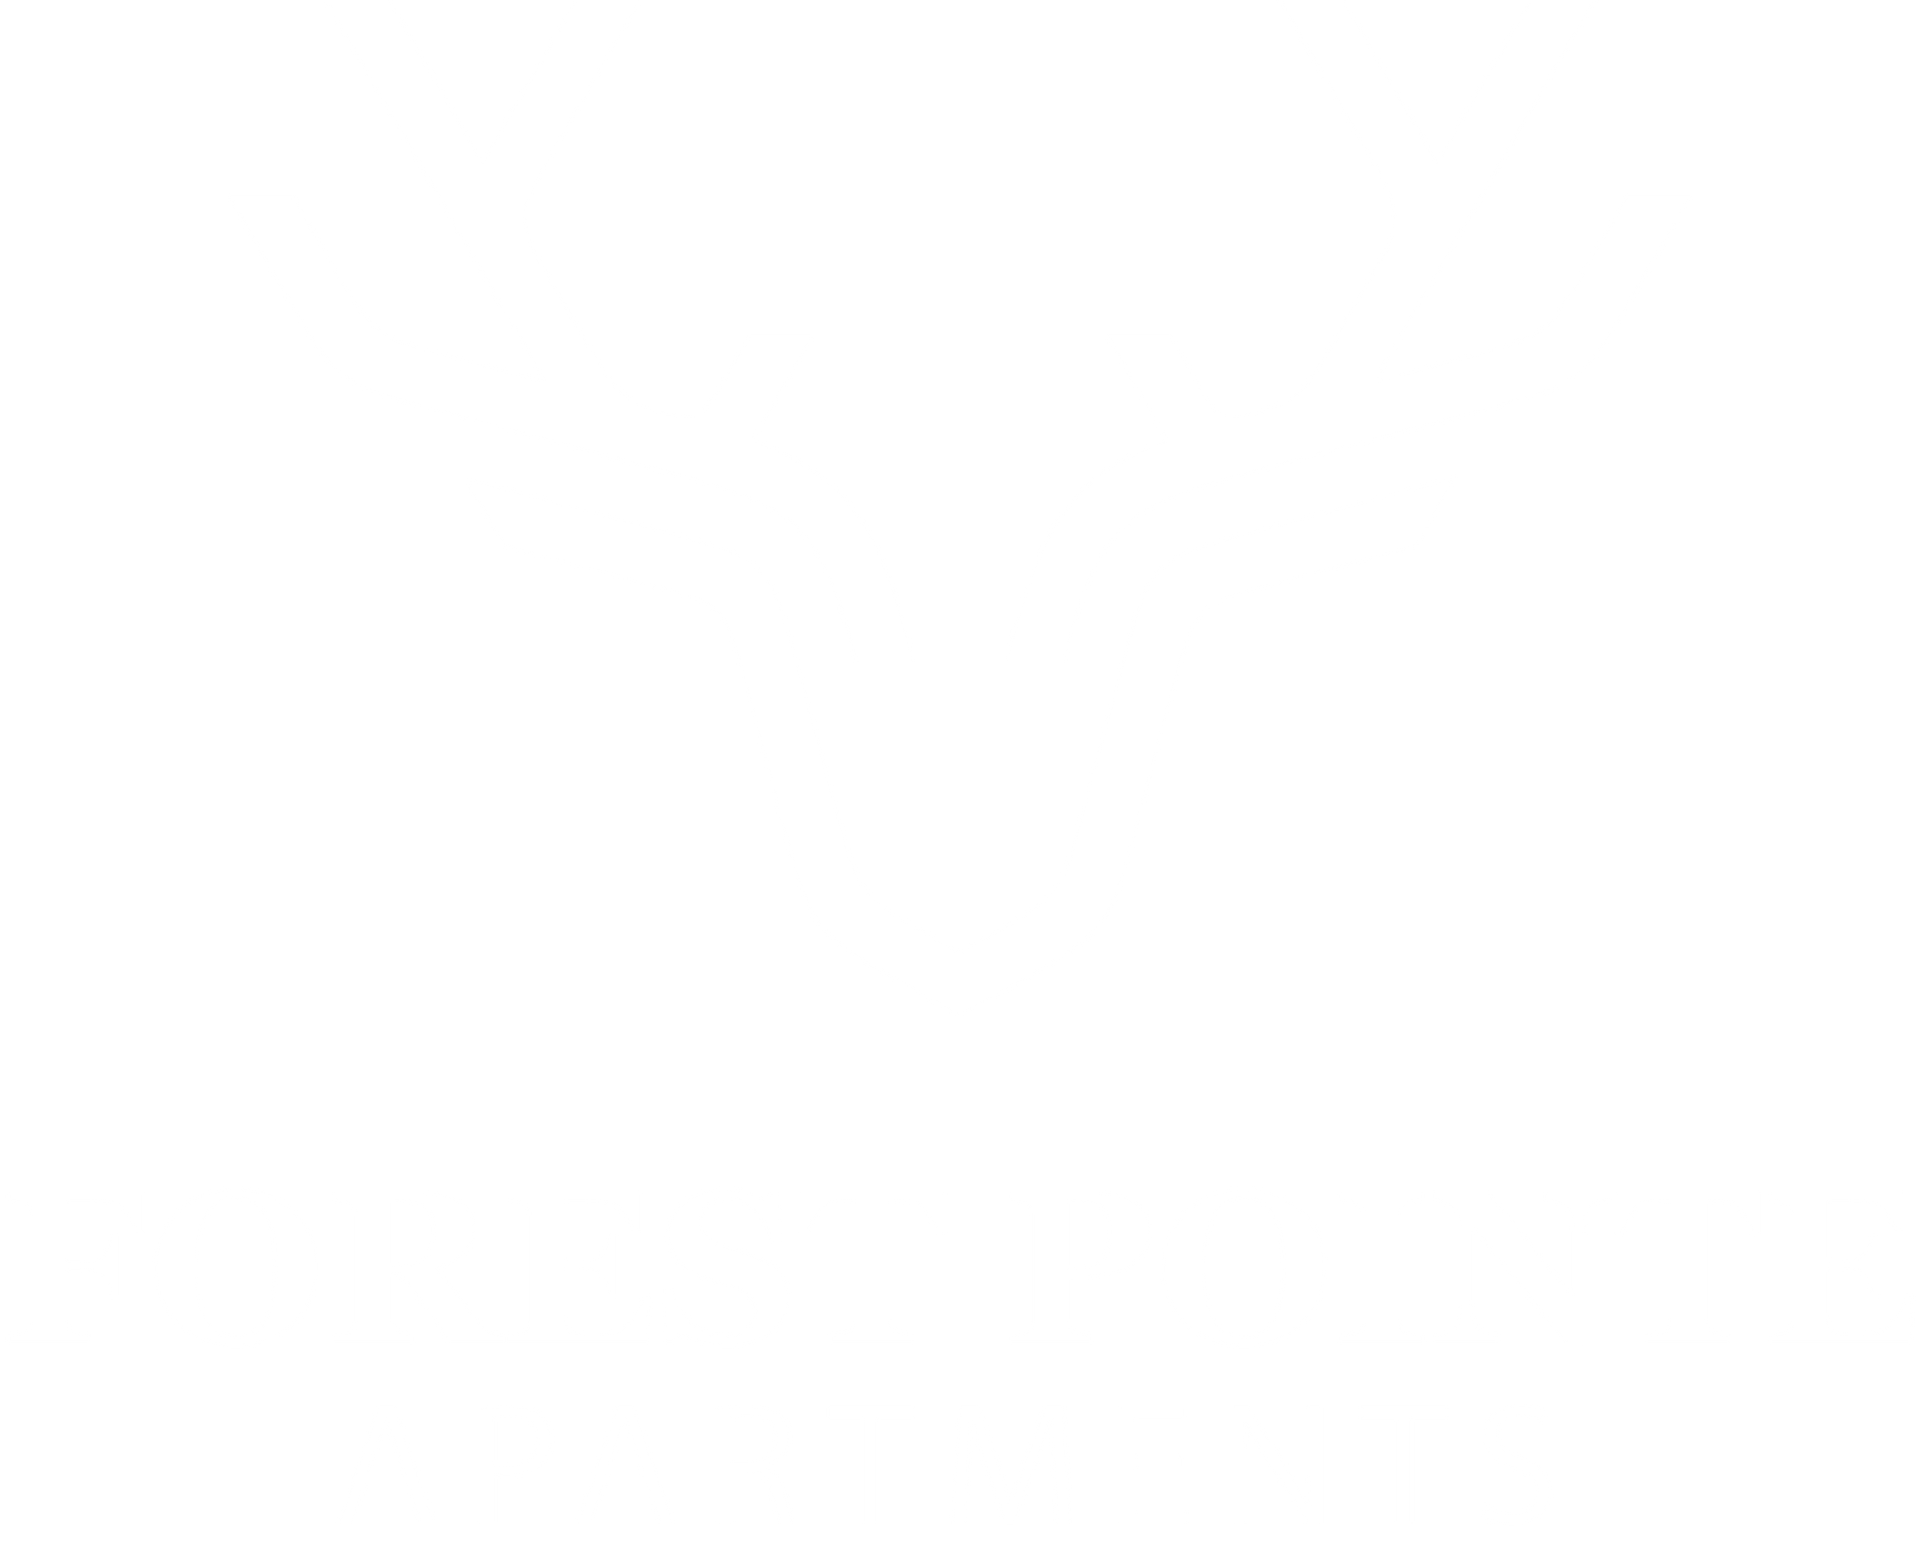 Forest Pointe Apartments Logo